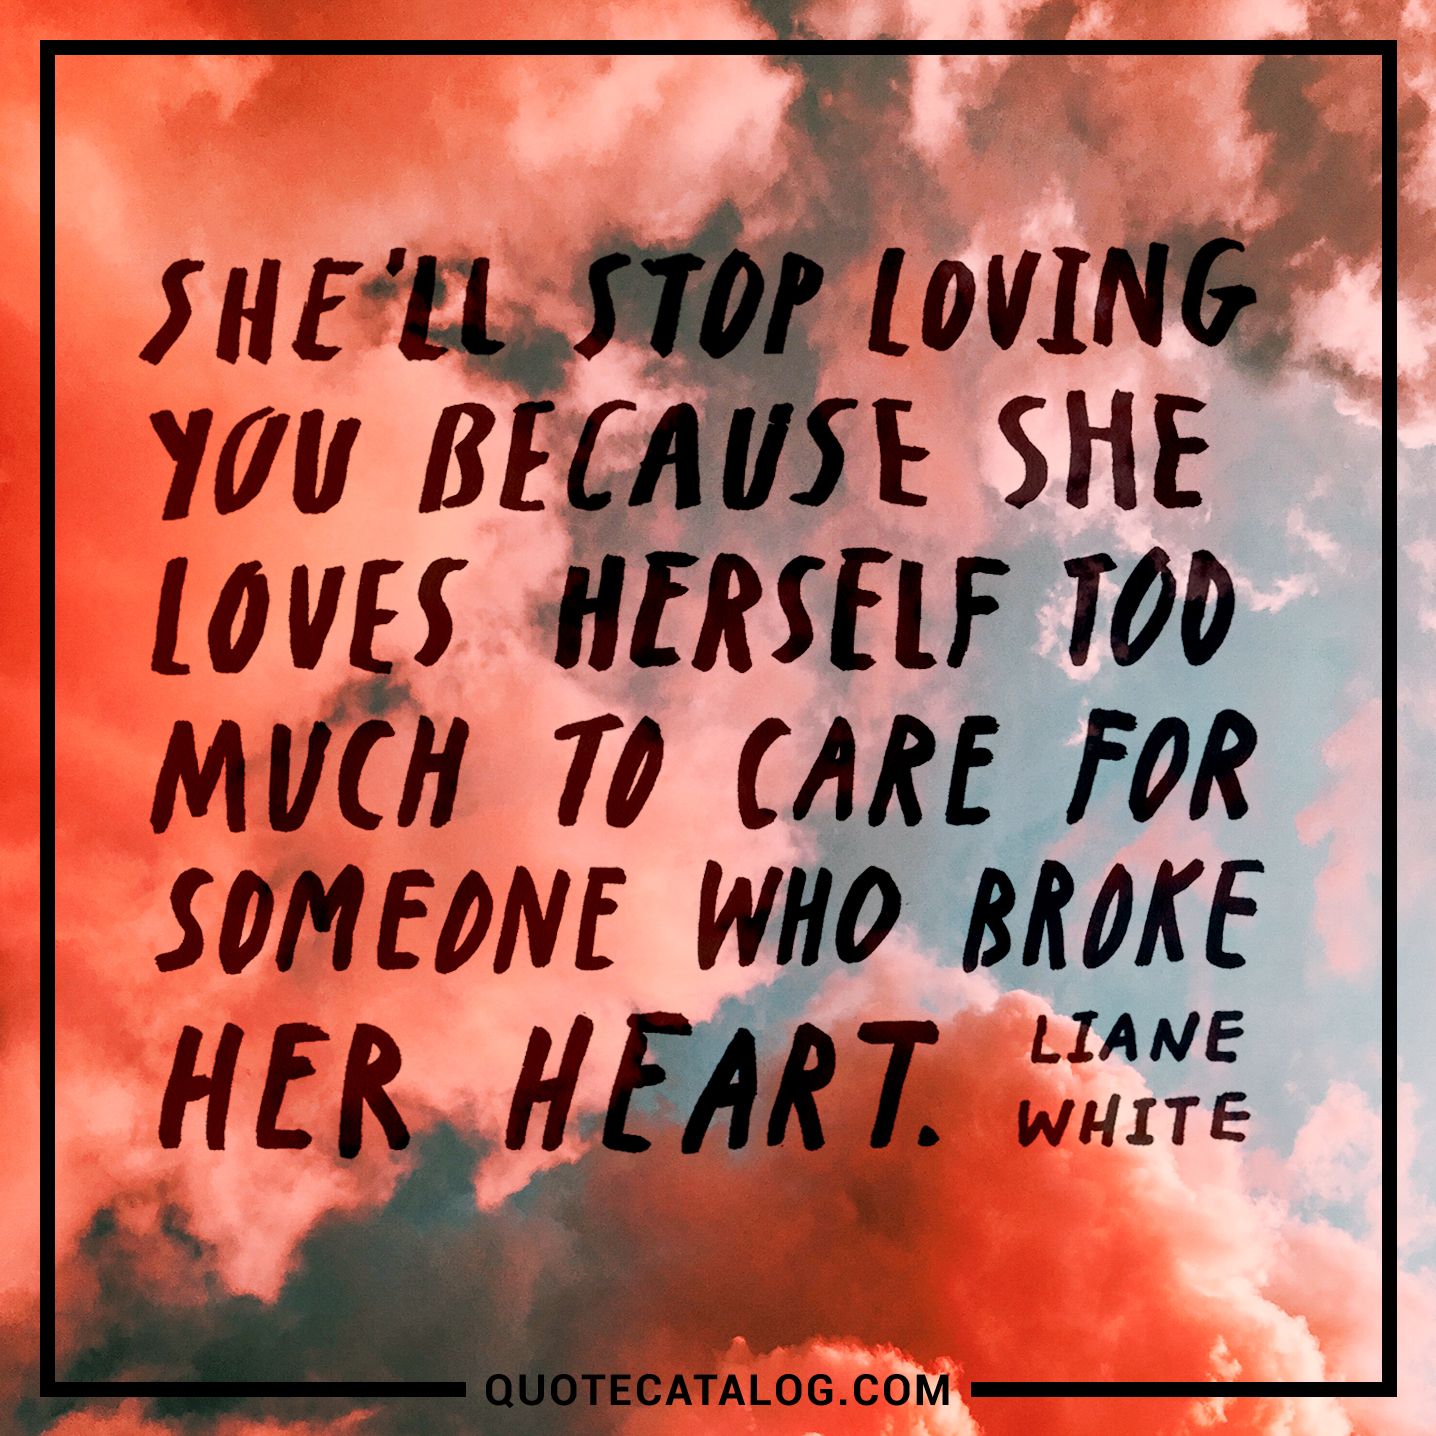 She ll stop loving you because she loves herself too much to care for someone